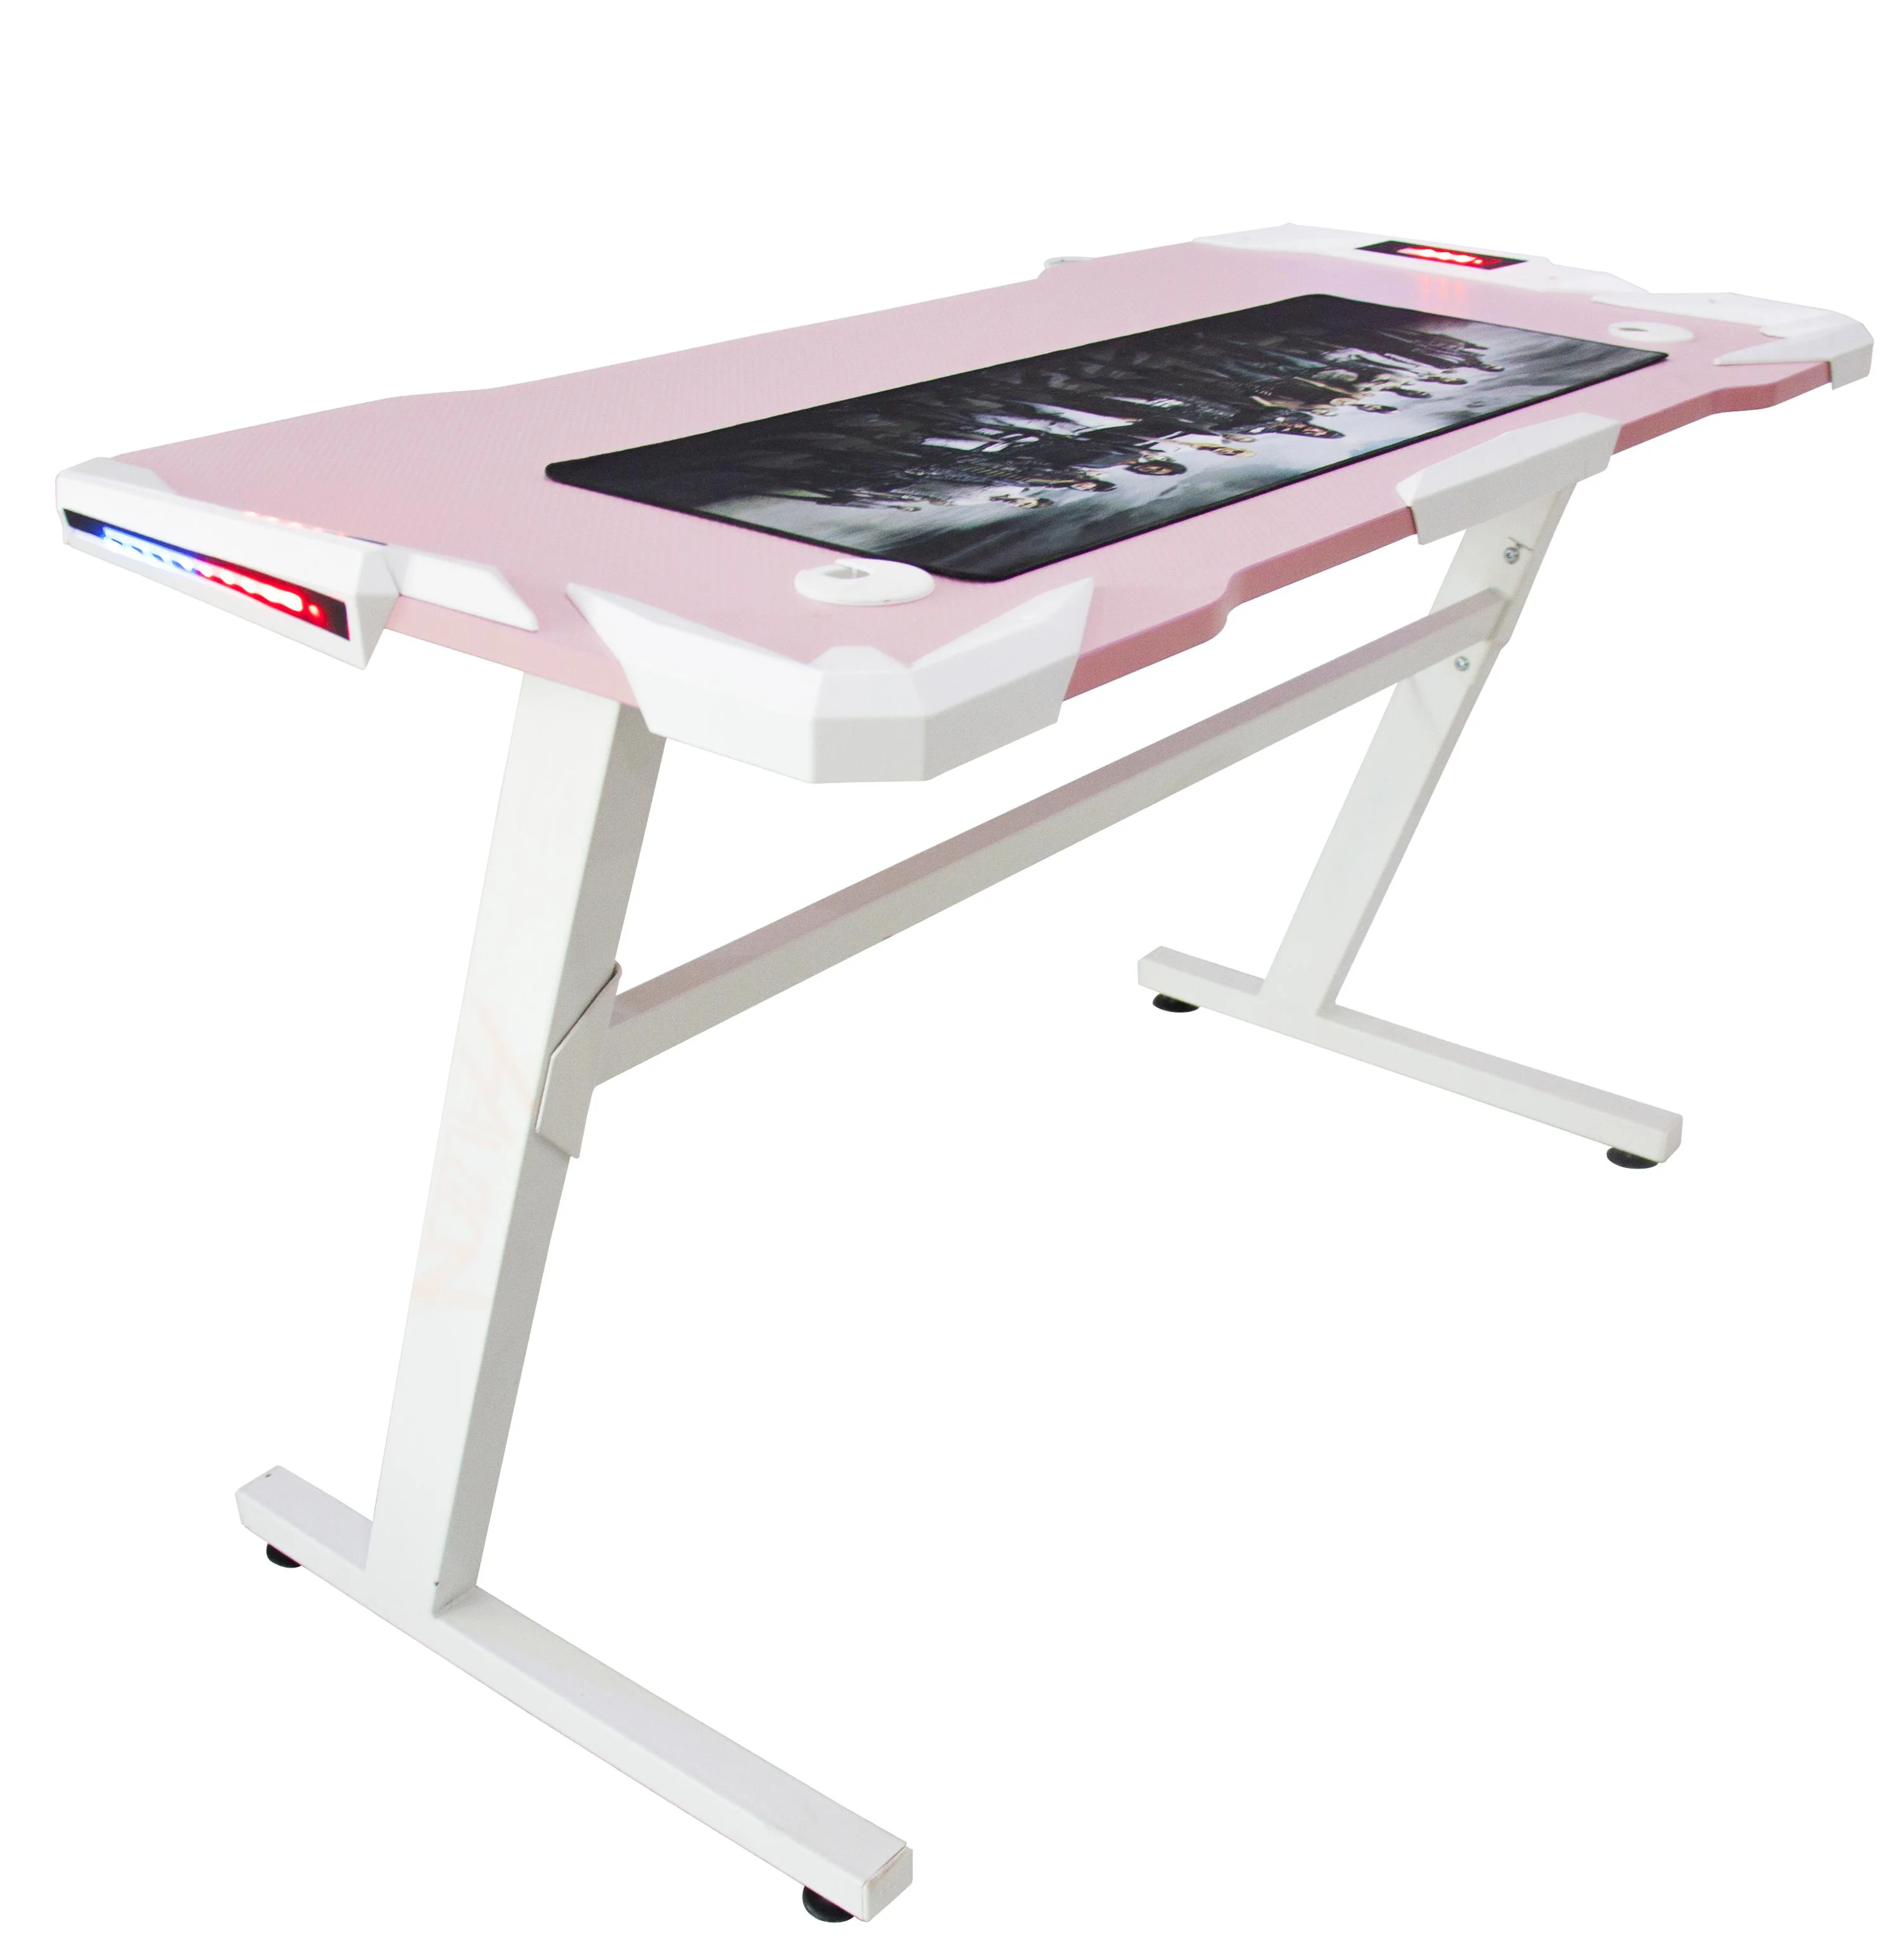 High quality pink laptop table gaming table and cheap laptop table wholesale (1600284364728)